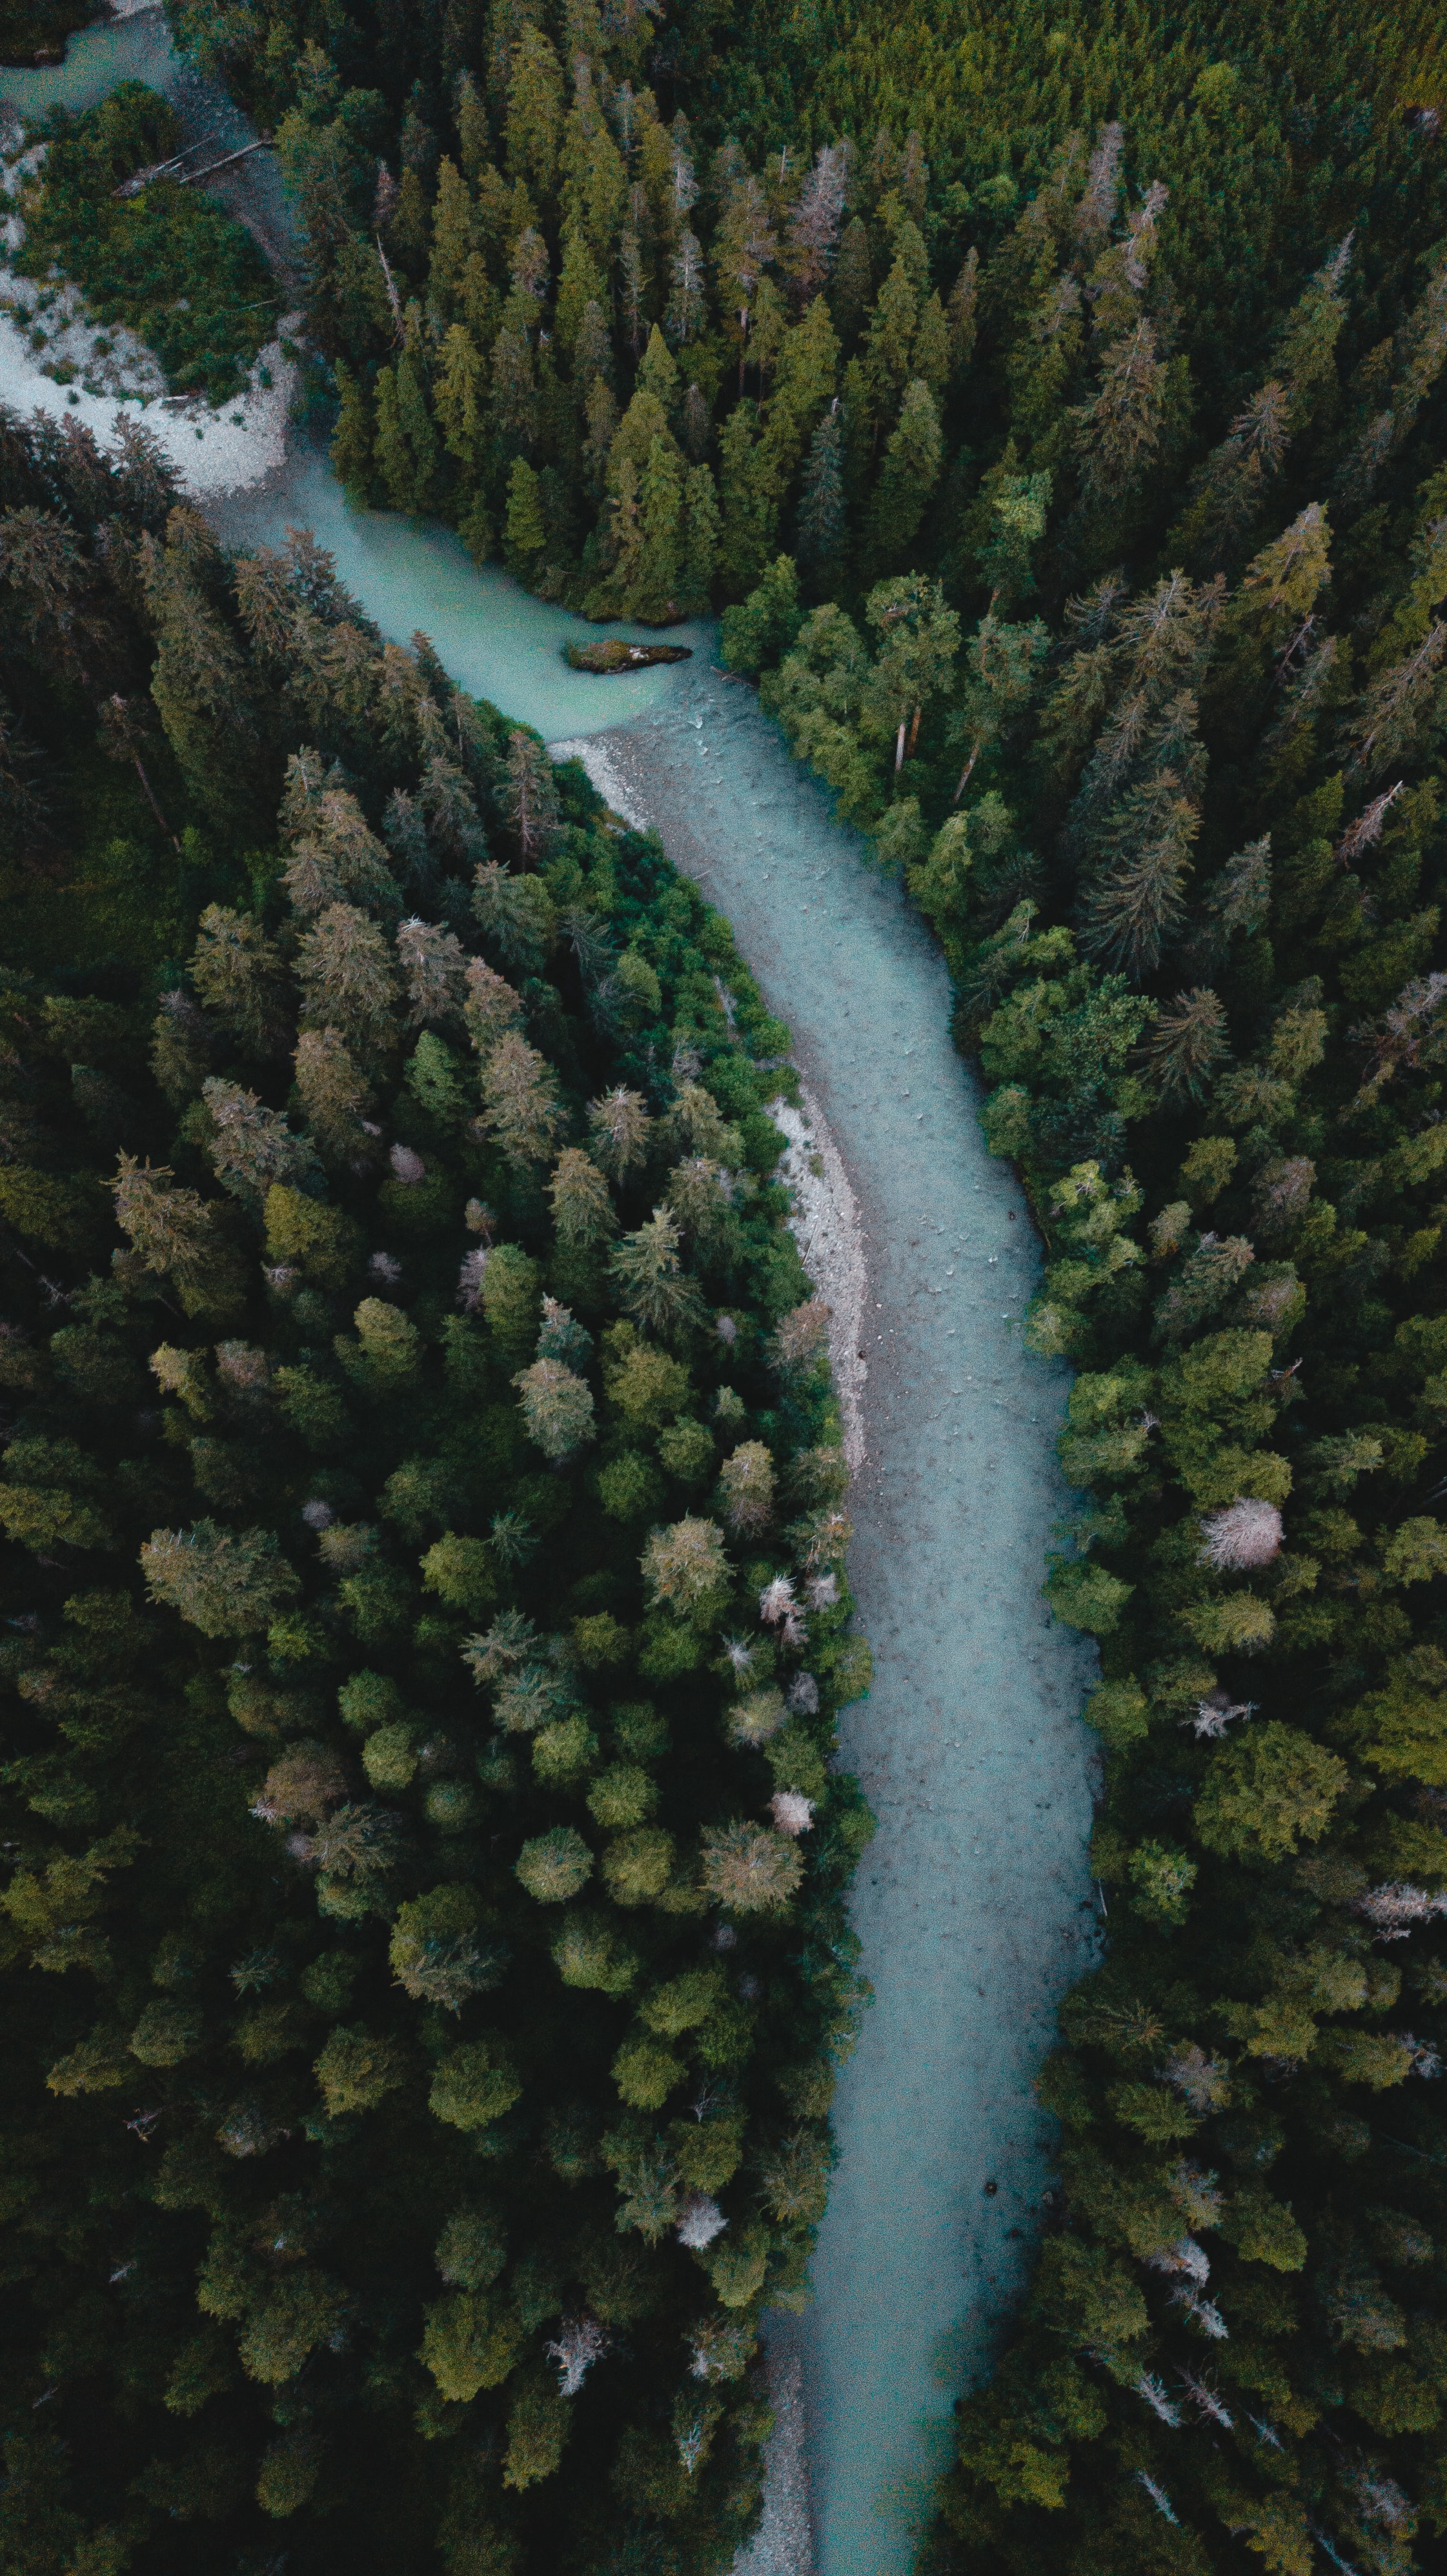 trees, sinuous, nature, rivers, view from above, forest, winding